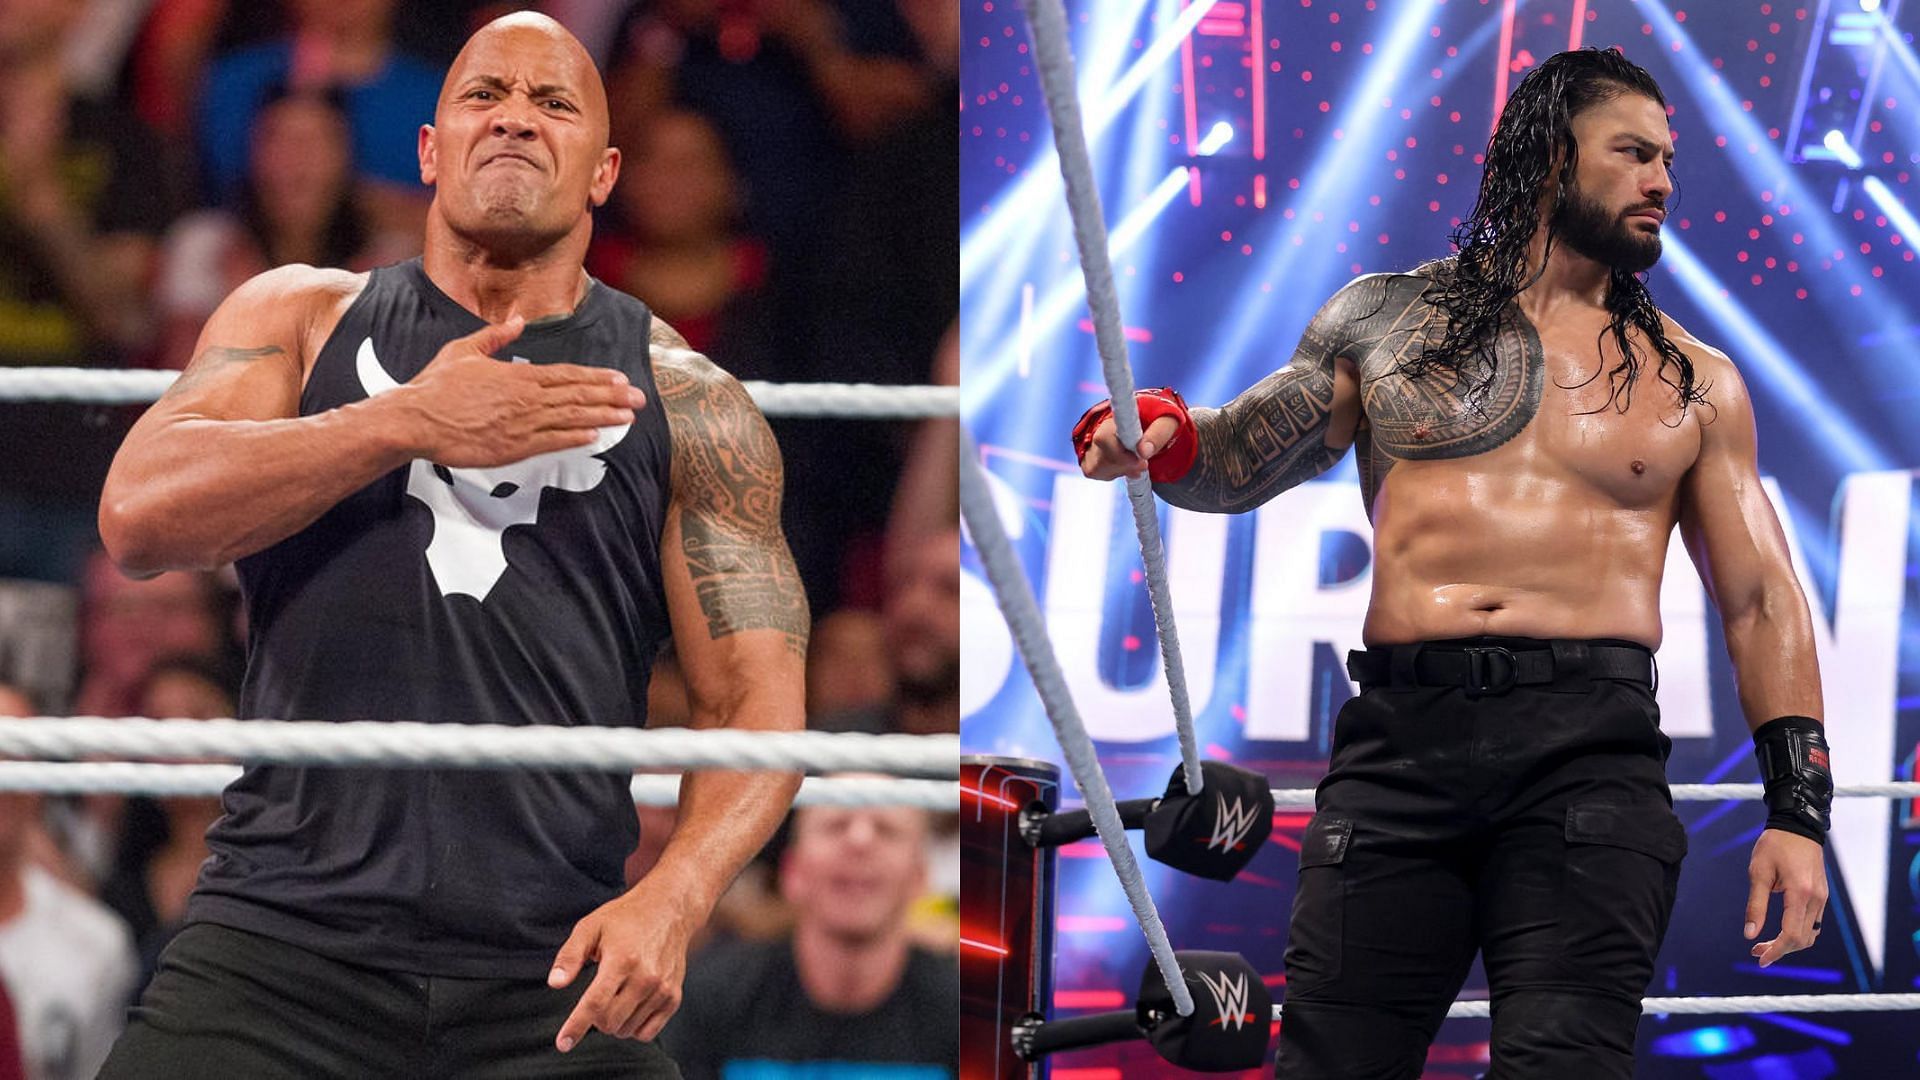 The Rock and Roman Reigns might collide at WrestleMania 